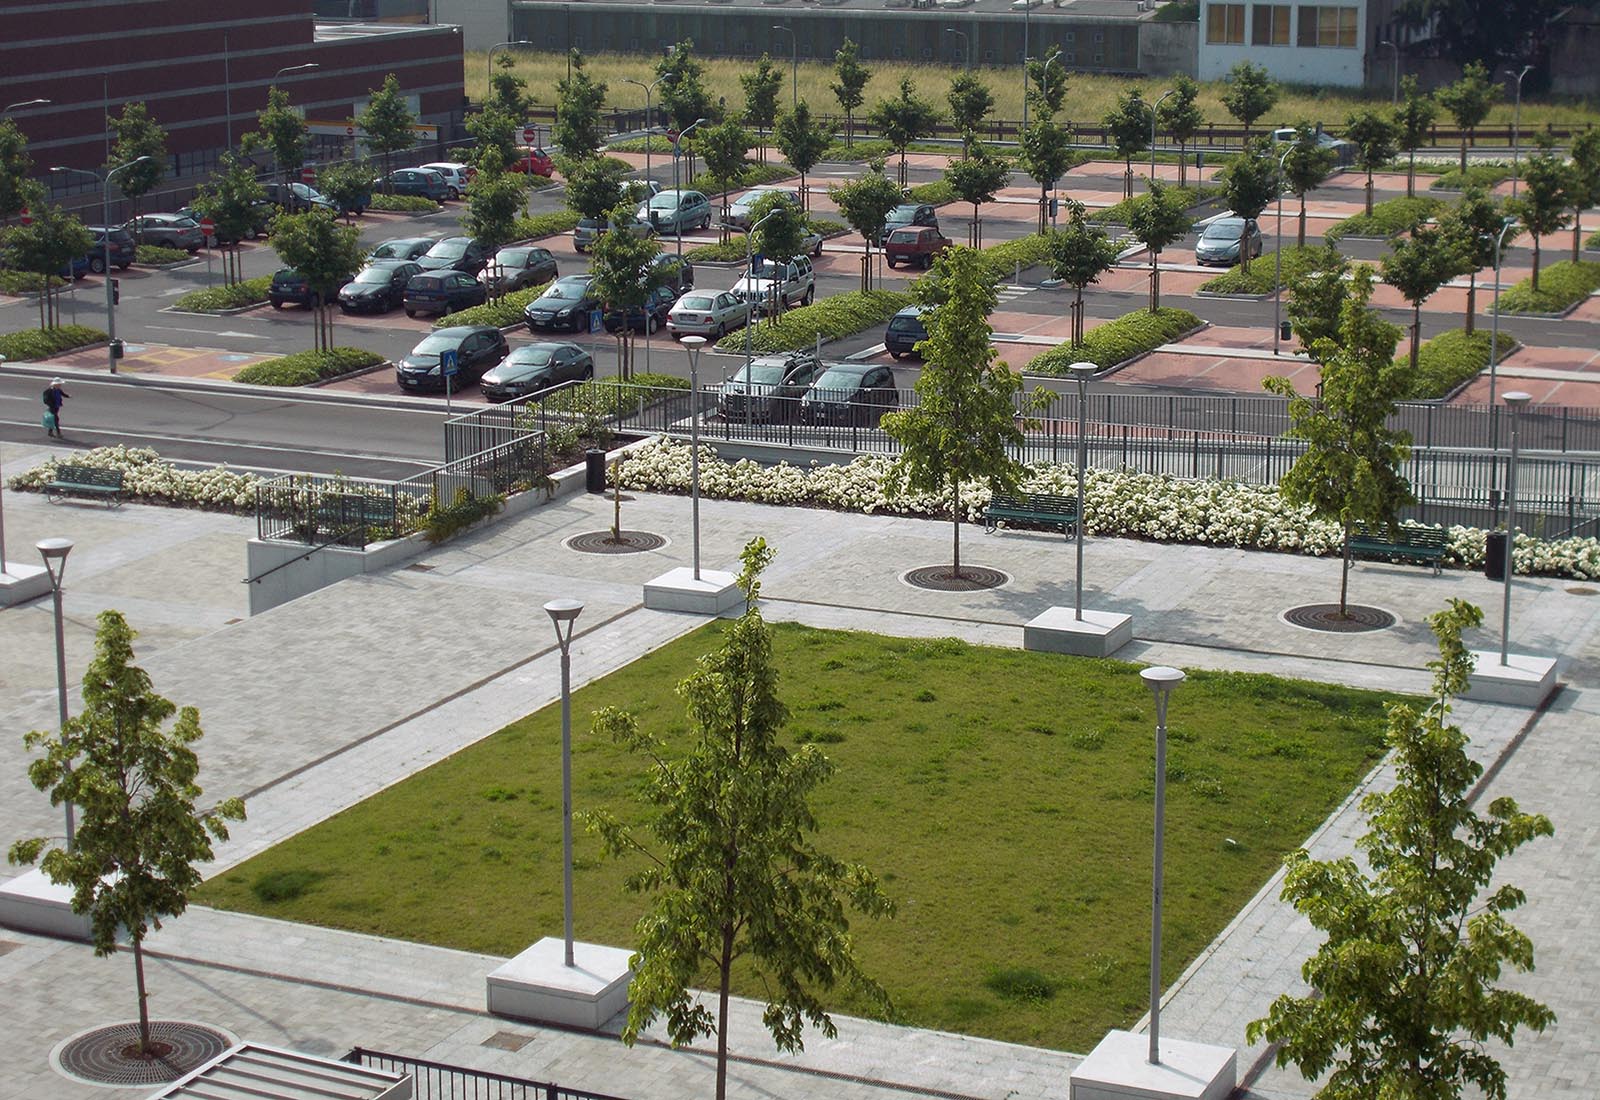 Square and parking lots in Adriano area Milan - The square and the south parking lot